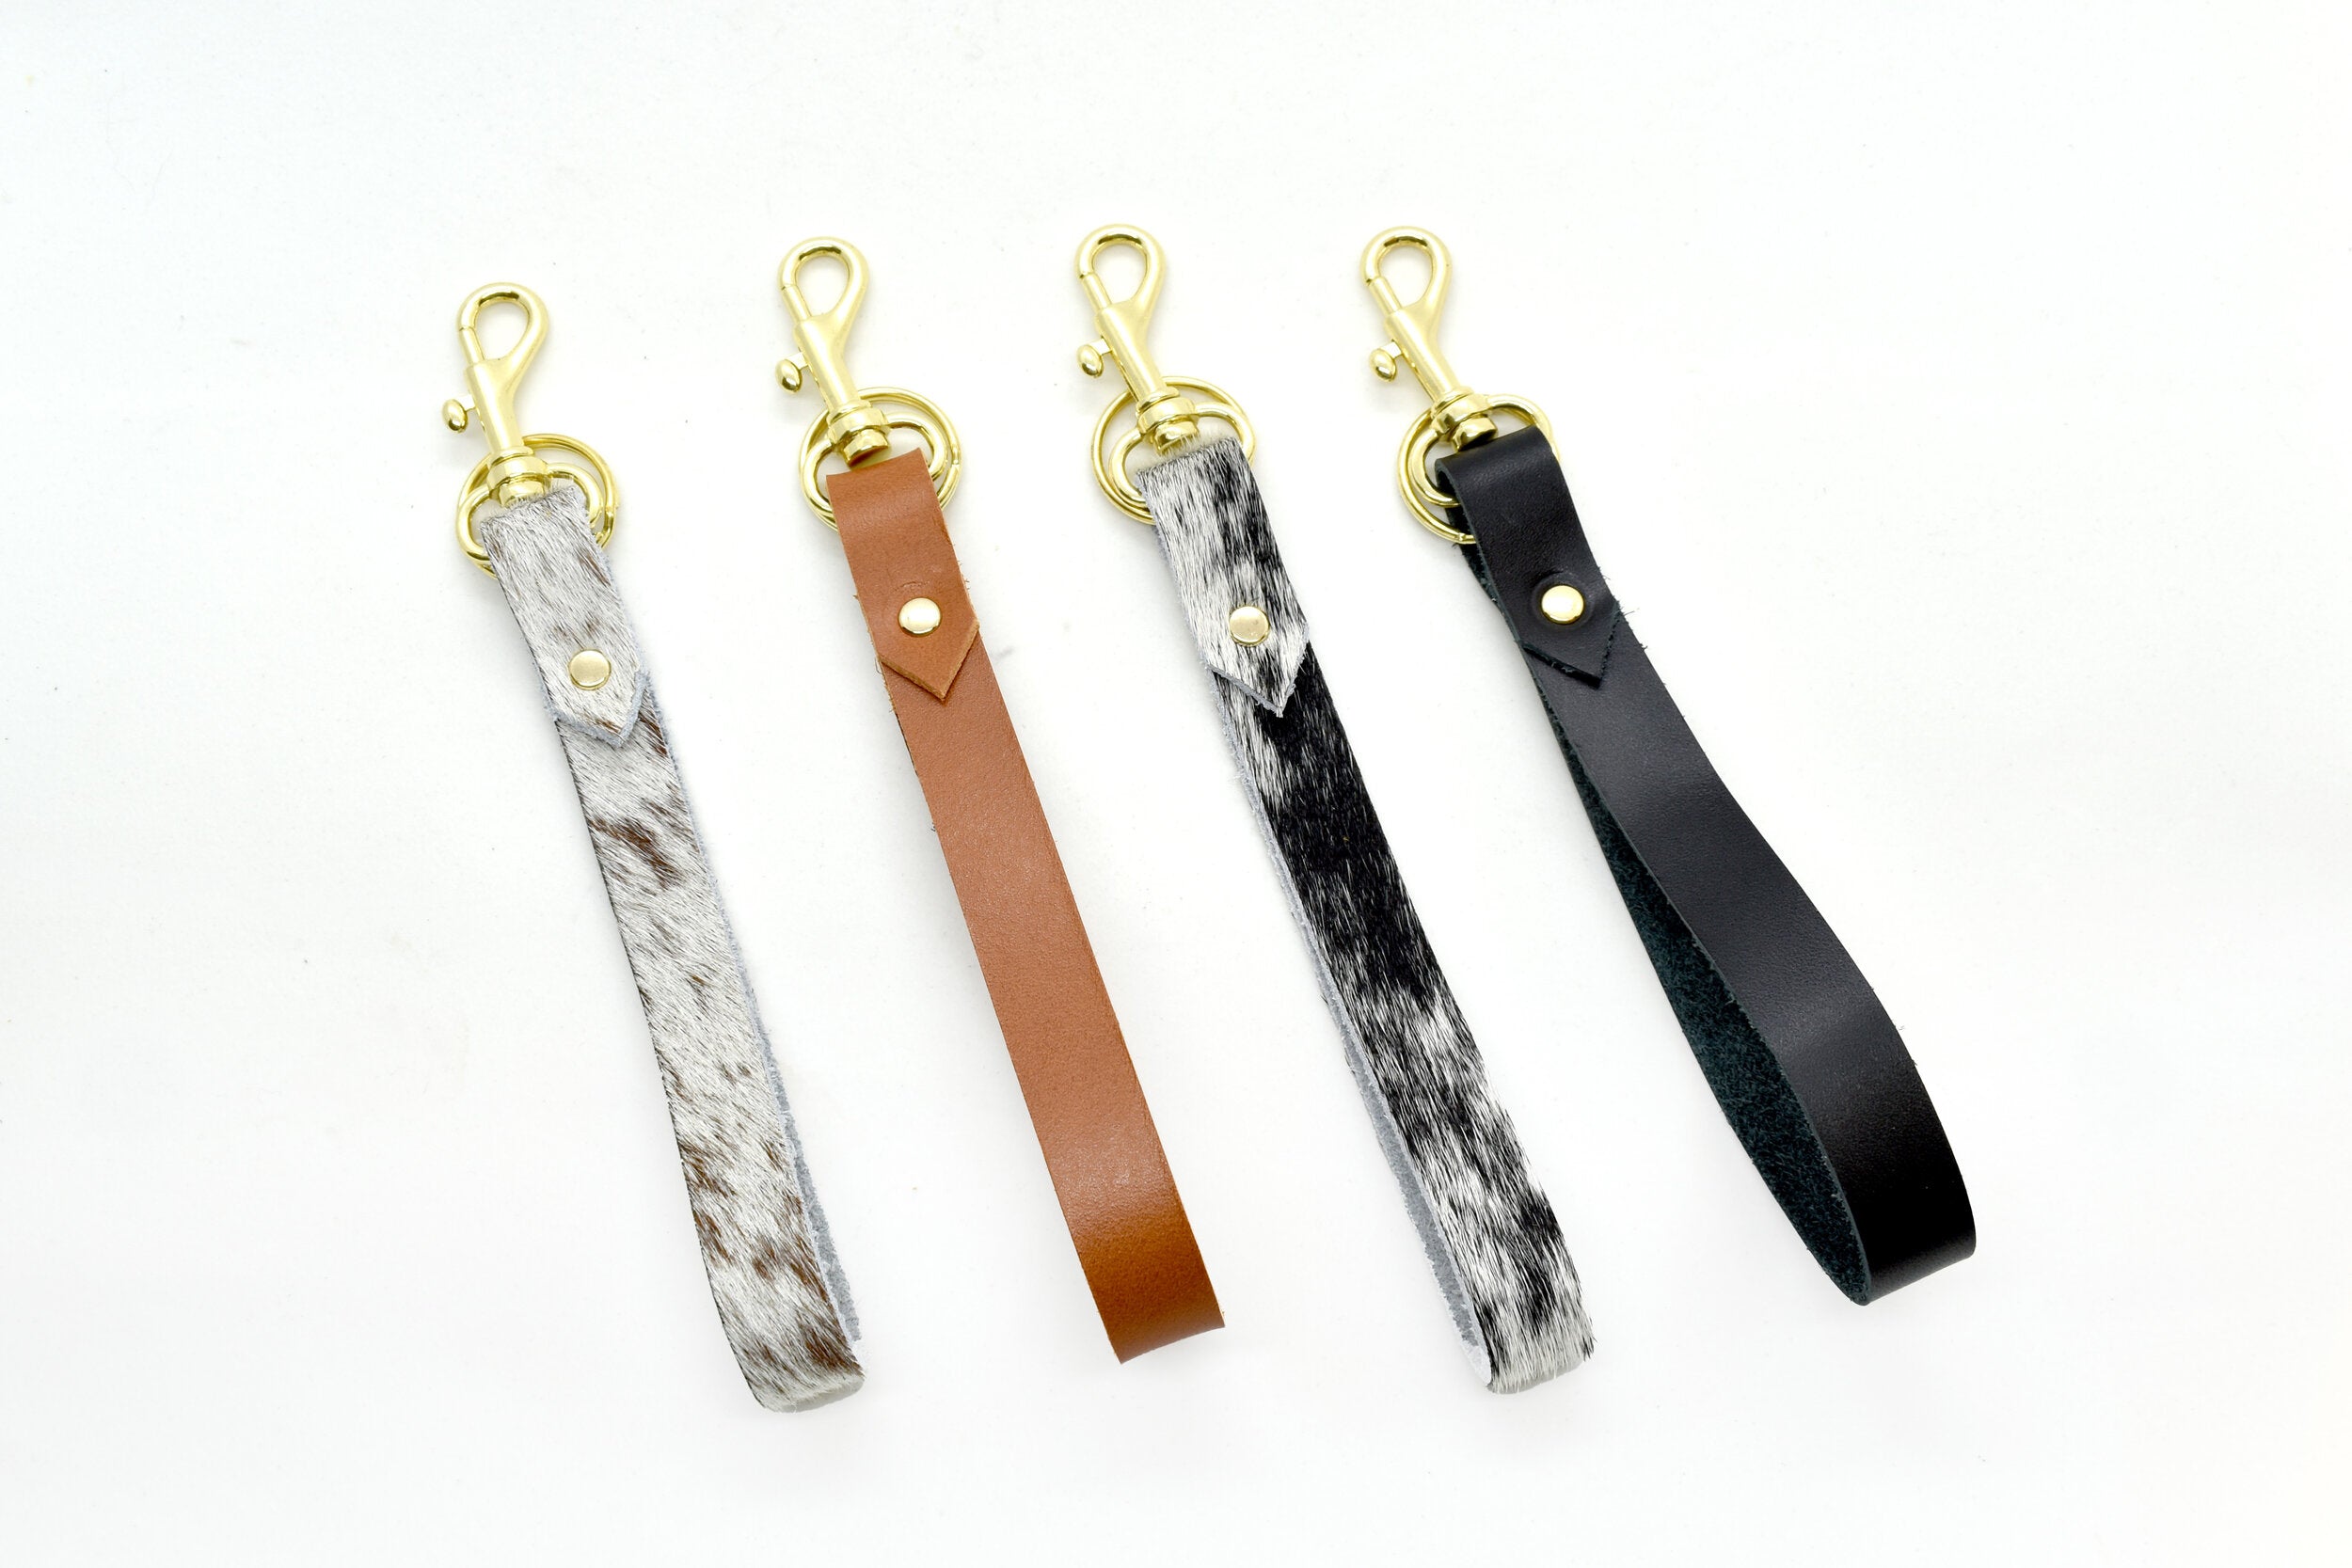 wrist strap loop key chains in colorful authentic leather